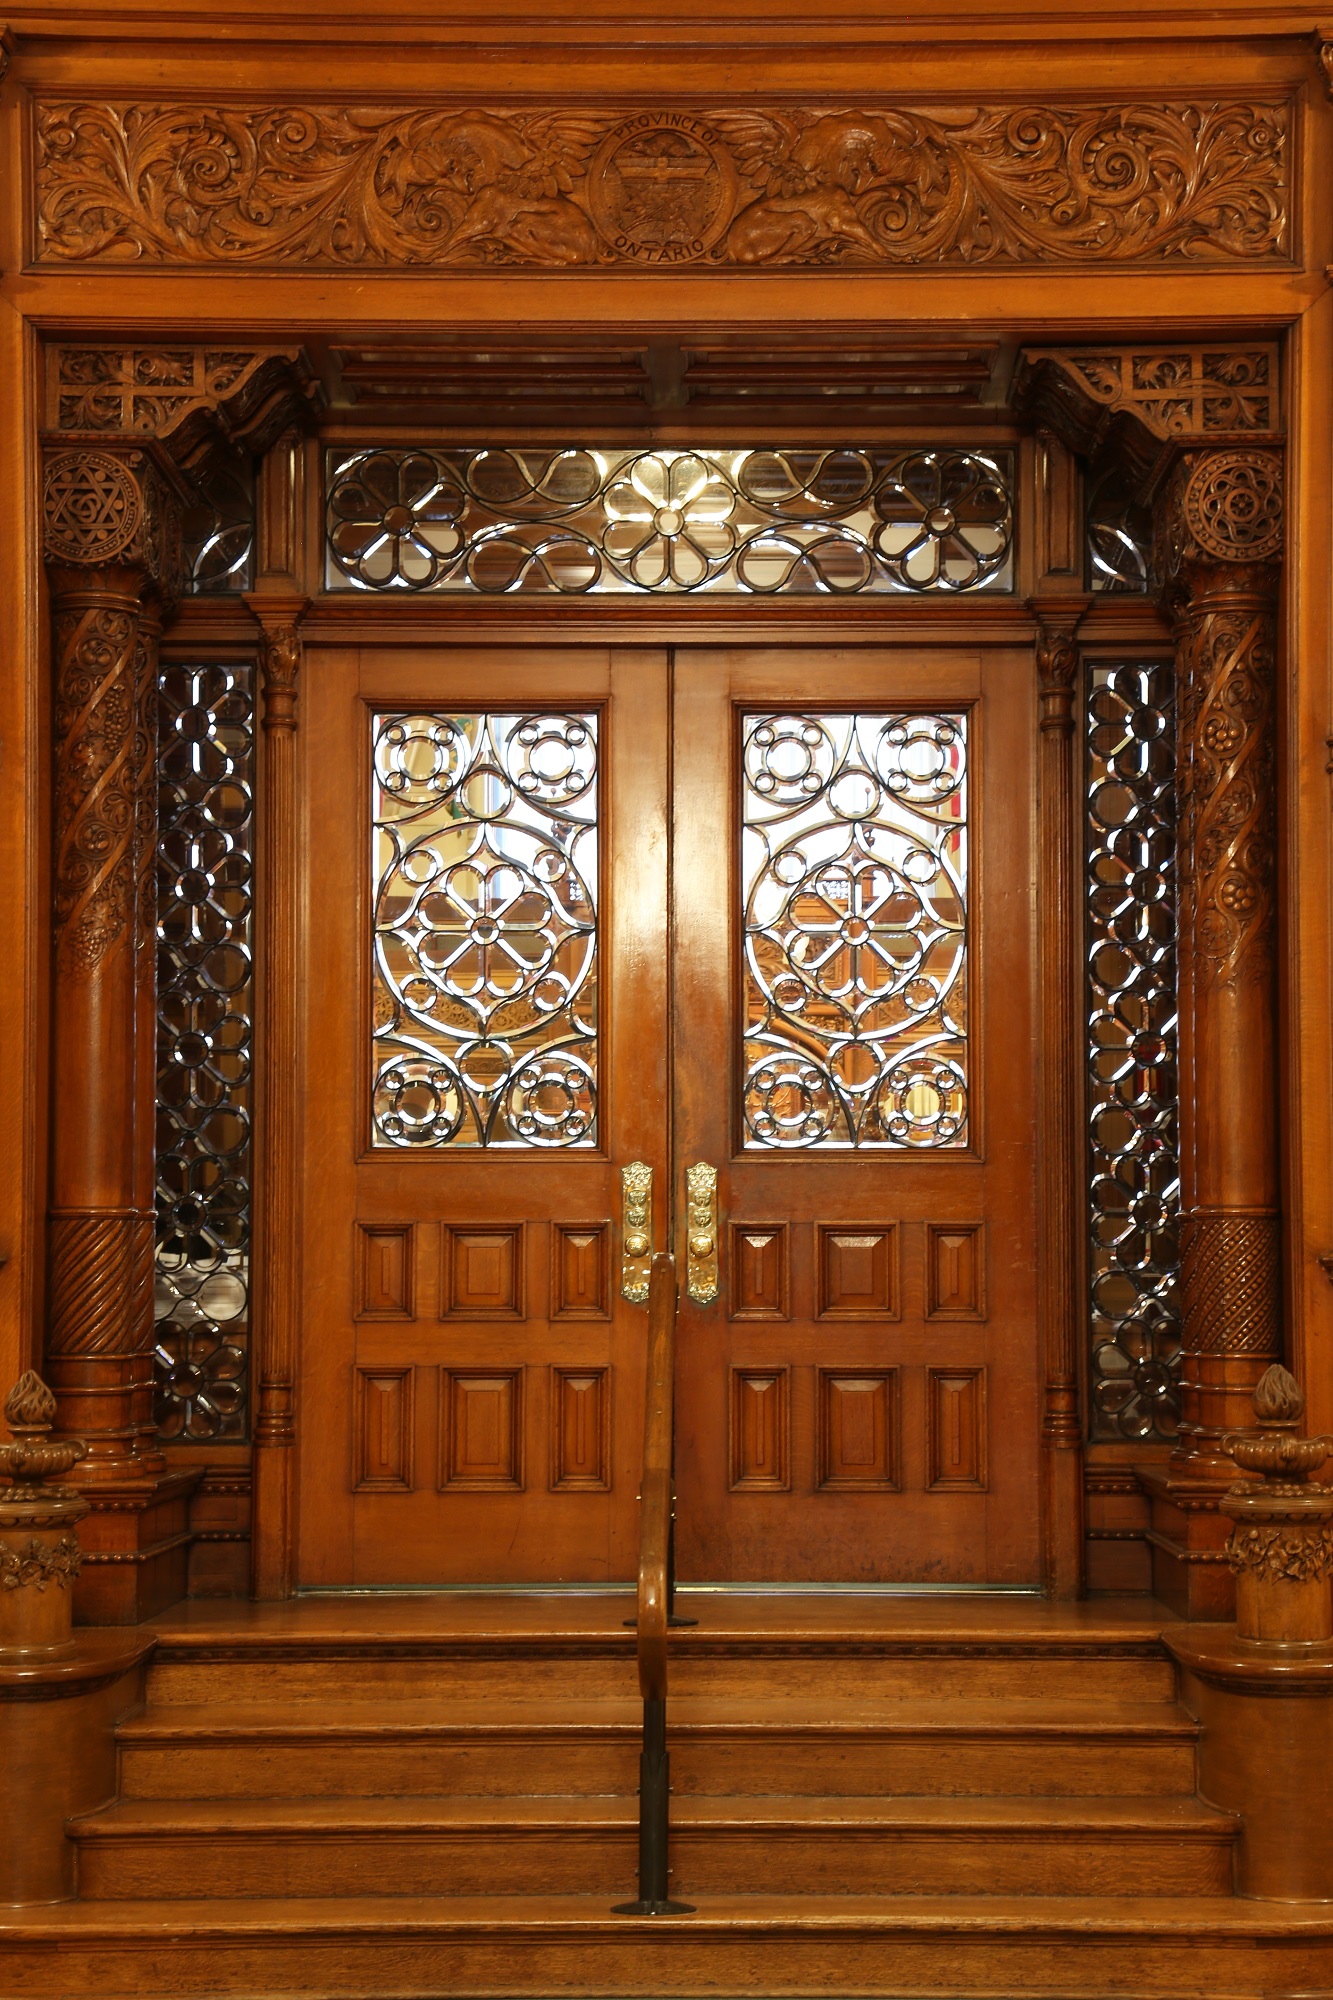 A picture of the doors leading into Ontario's Legislative Chamber.